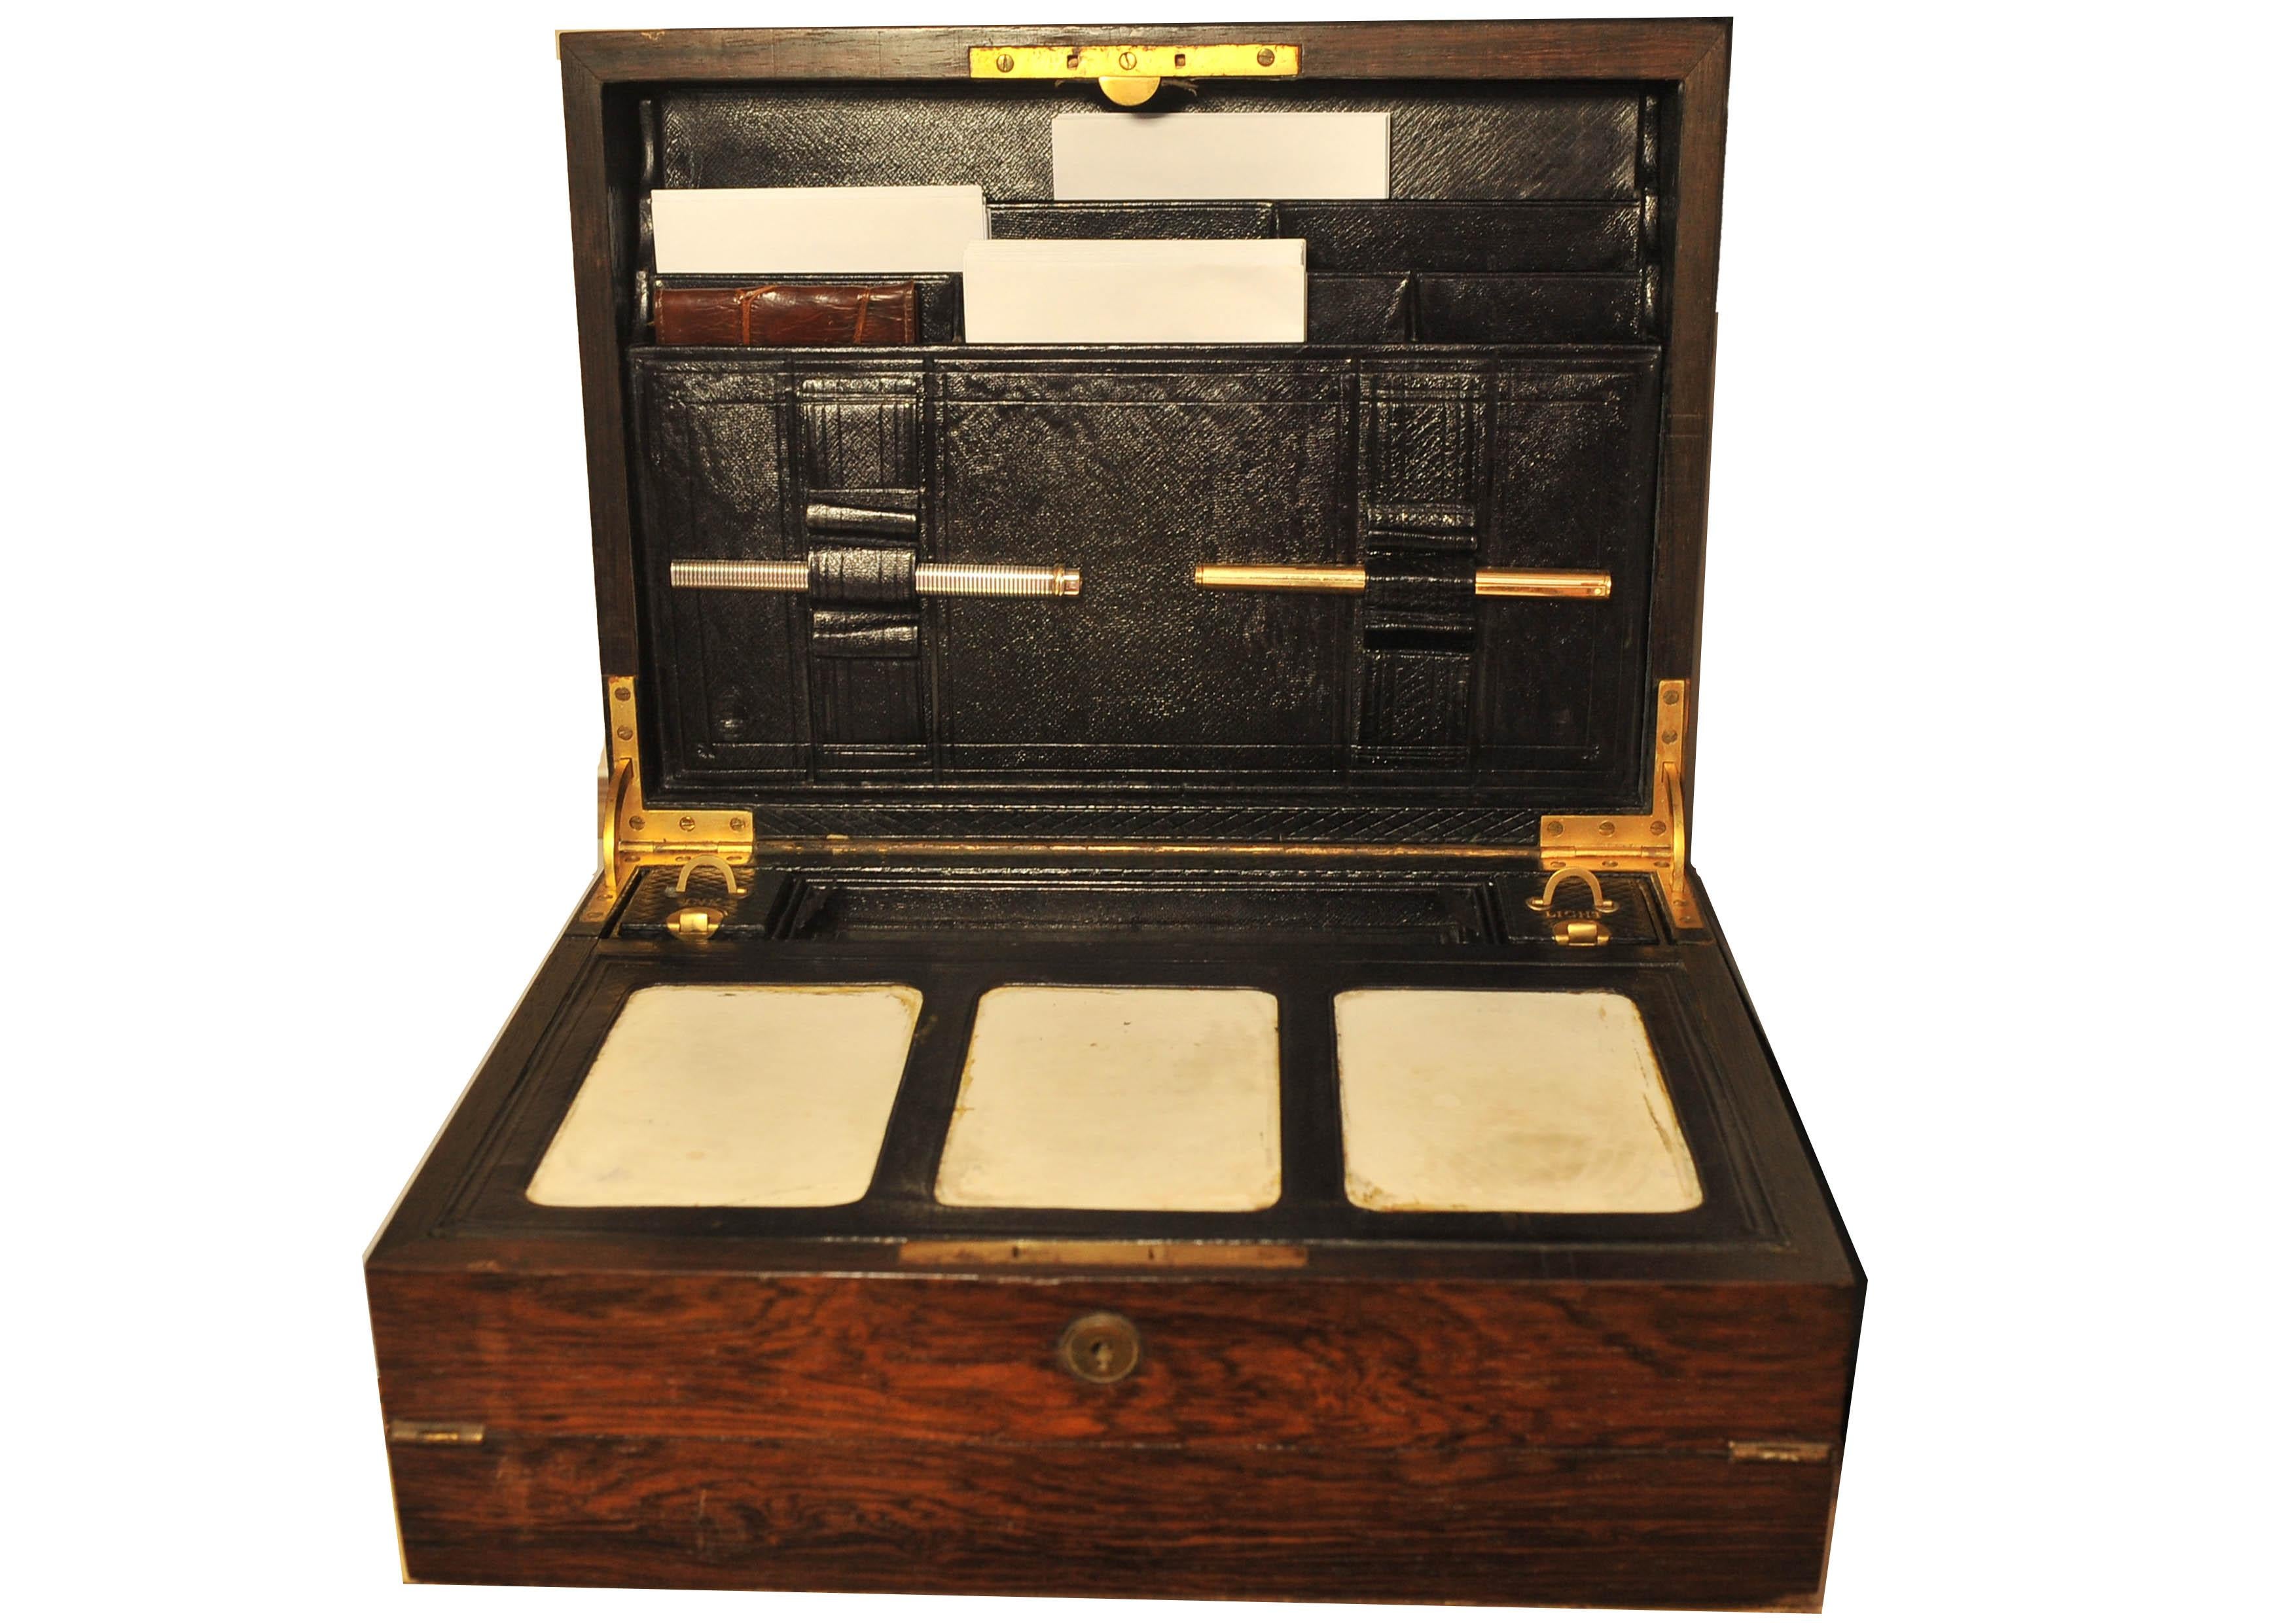 A Beautiful & Luxurious Handcrafted Victorian Bramah Rosewood Fold-out Travelling Writing Companion With Fitted Leather Interior, Ceramic Blotting Tablets.
Complete with Beautifully Designed inkwell and match-striker for light. New notepad, Quill